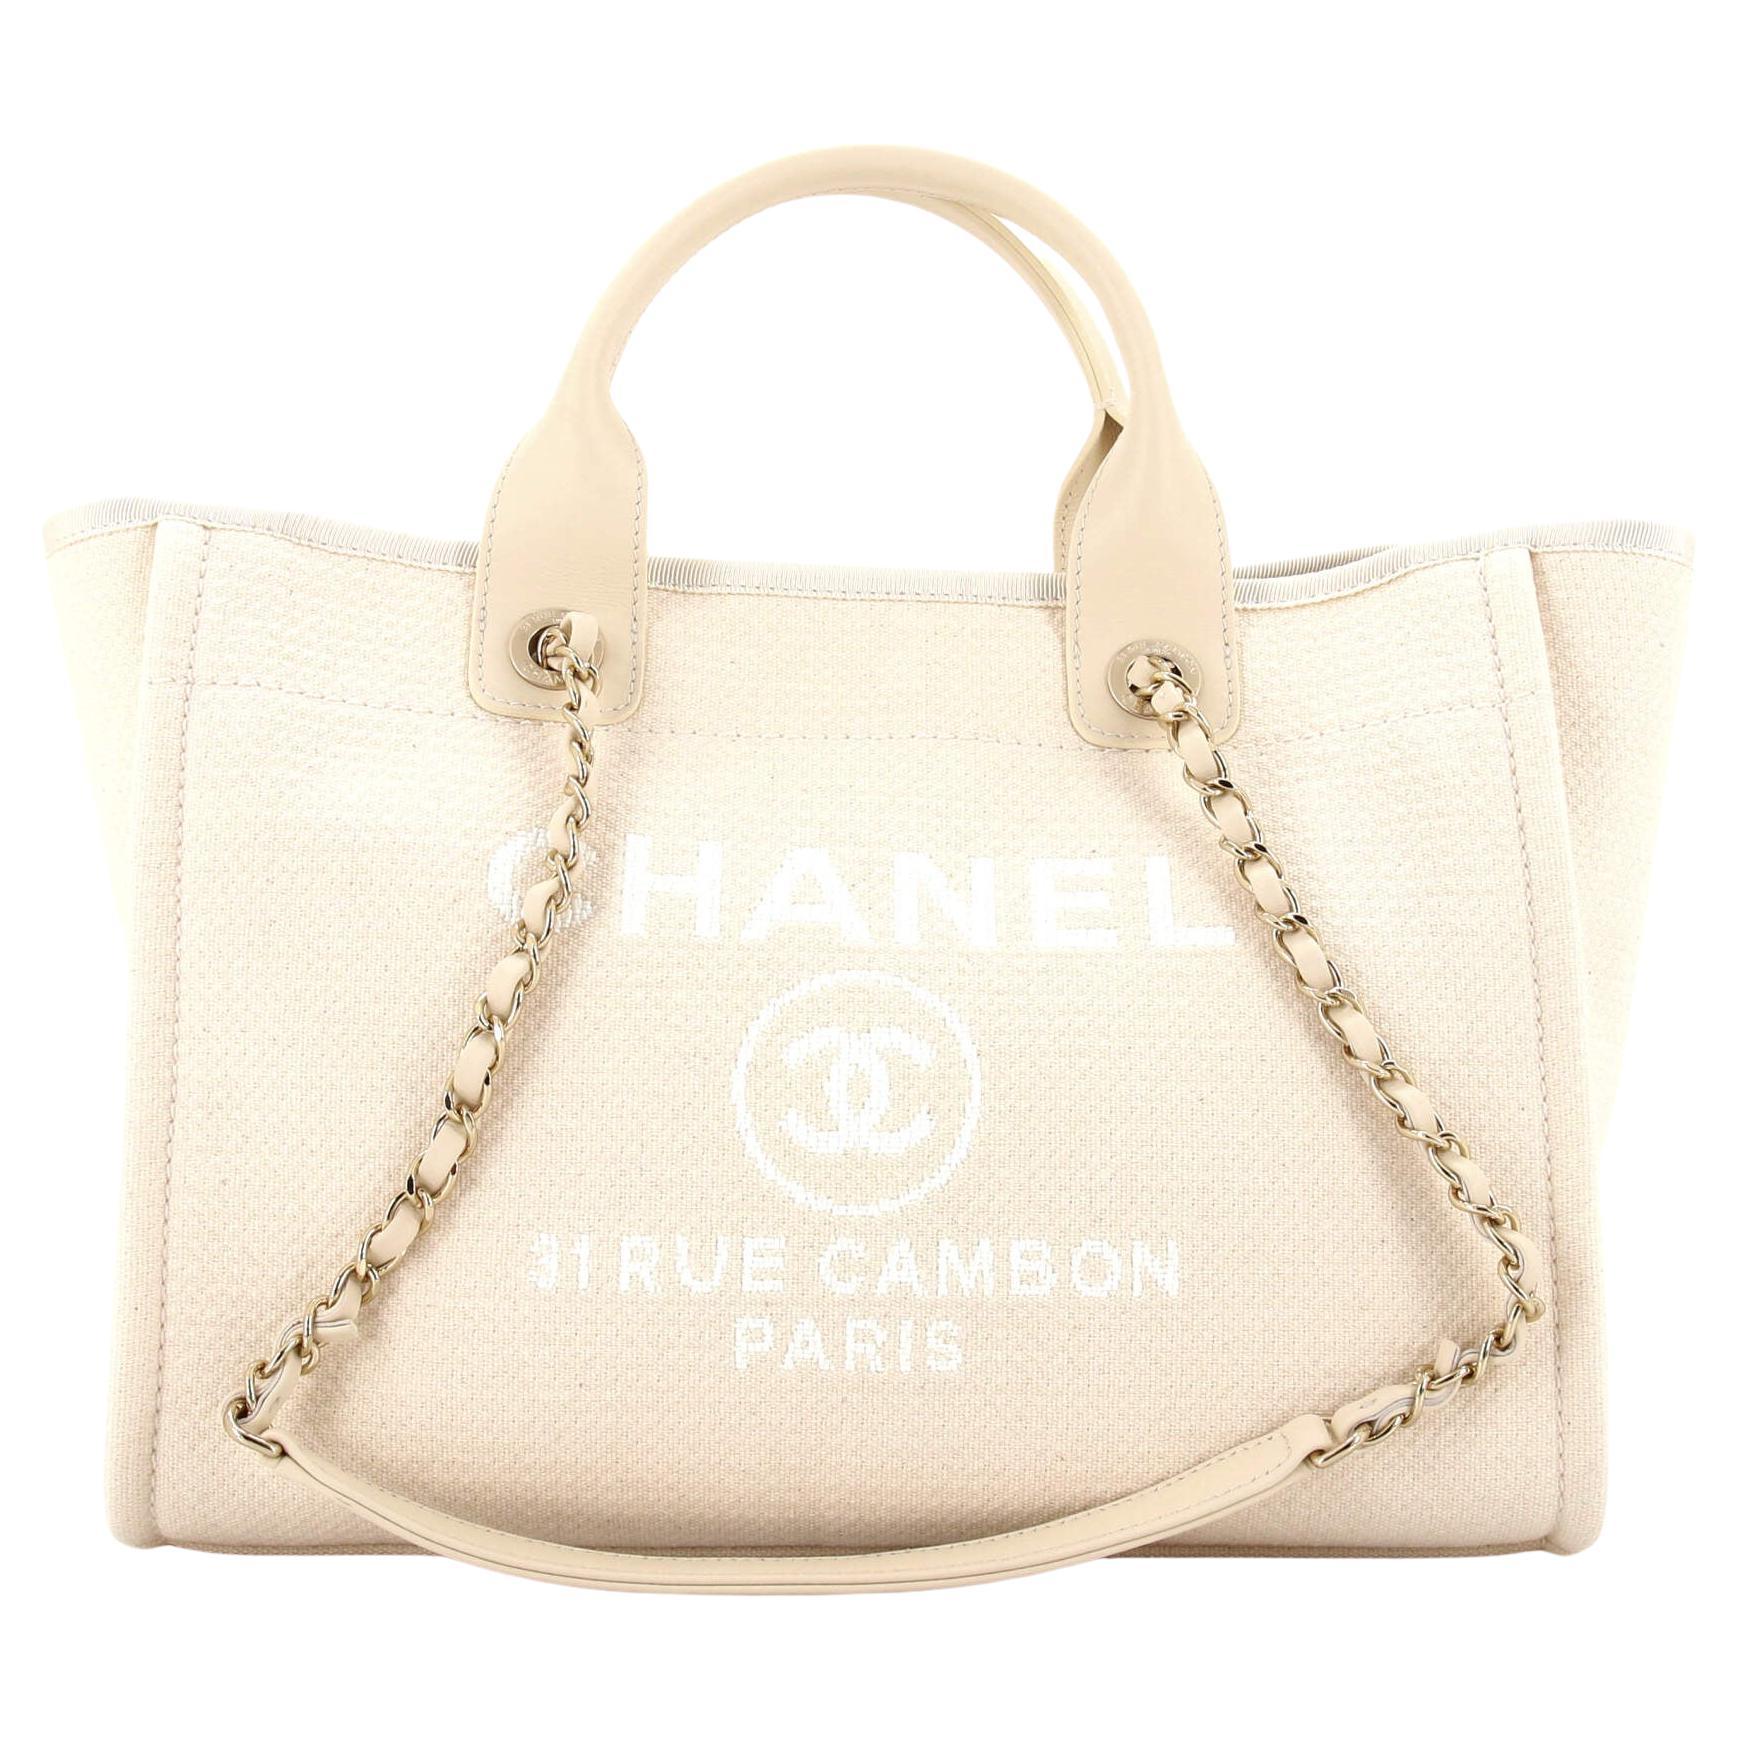 Chanel Deauville Medium Tote For Sale at 1stDibs  chanel deauville tote  price, chanel deauville price, chanel deauville tote medium